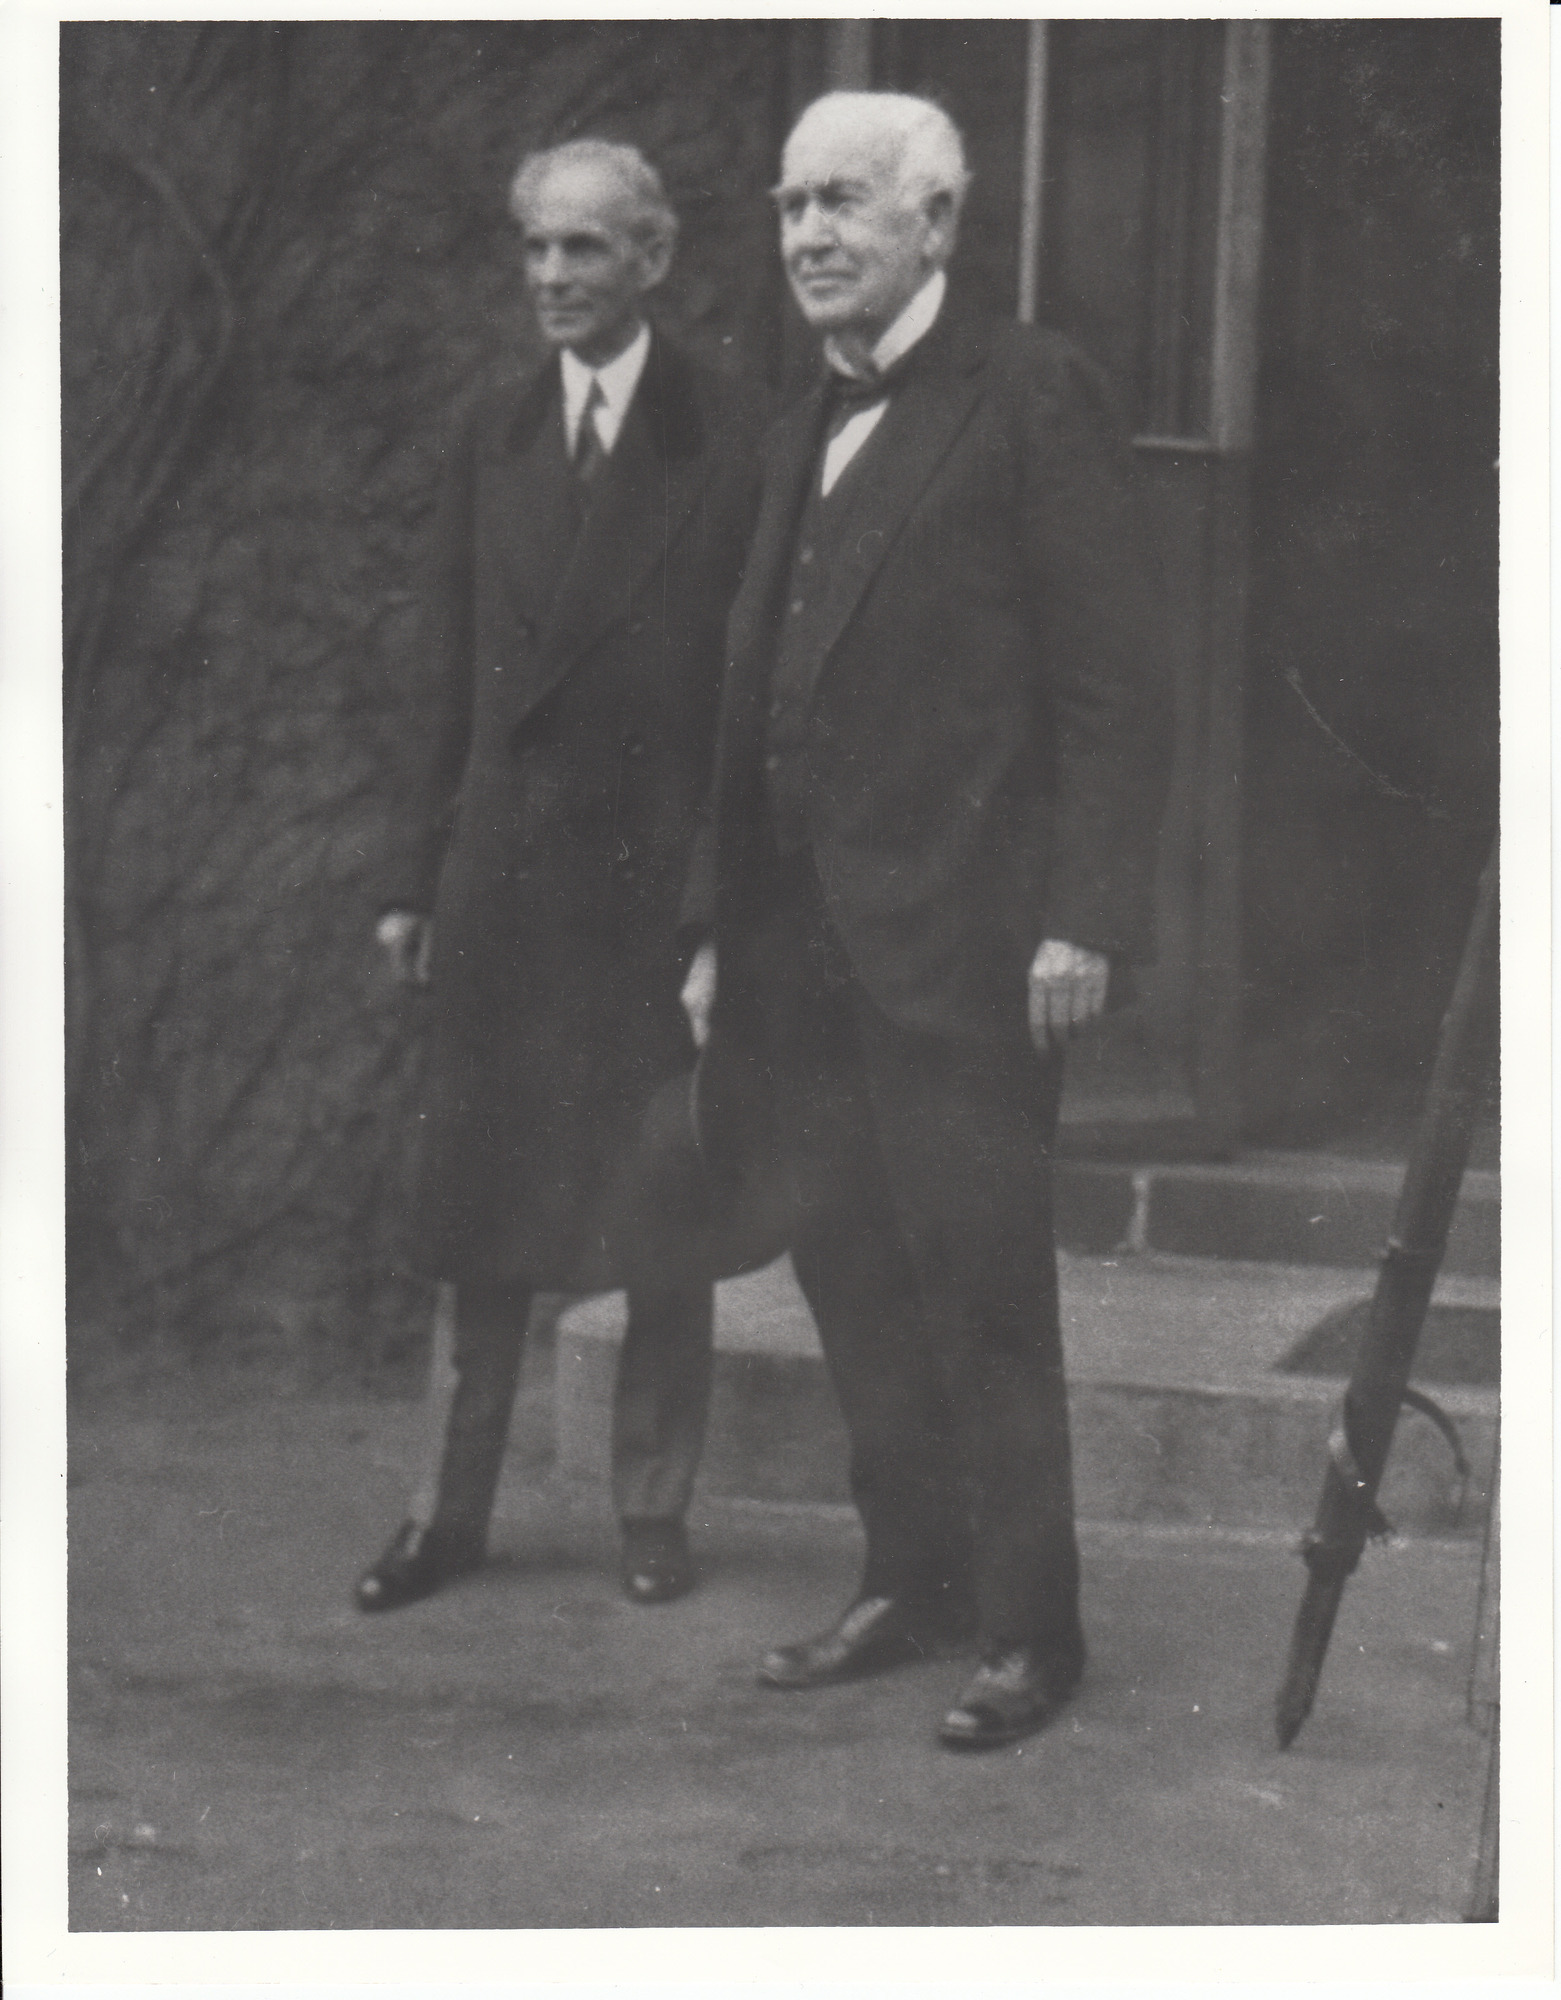 Henry Ford with Thomas Edison in front of Building 5 at Edison's West Orange Laboratory.